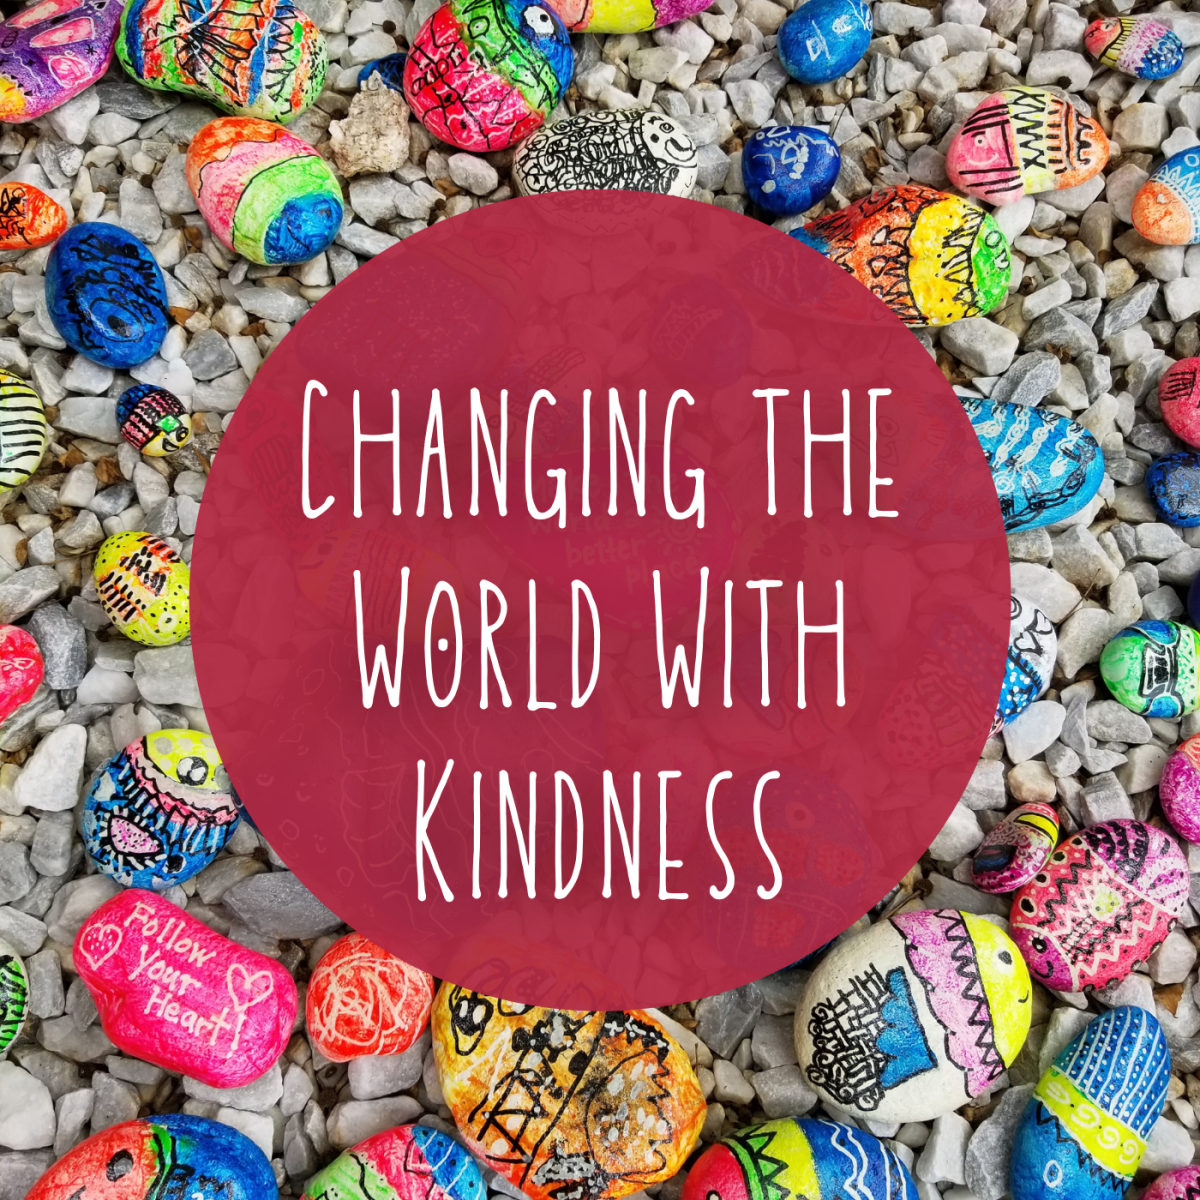 How Your Small, Random Acts of Kindness Change the World